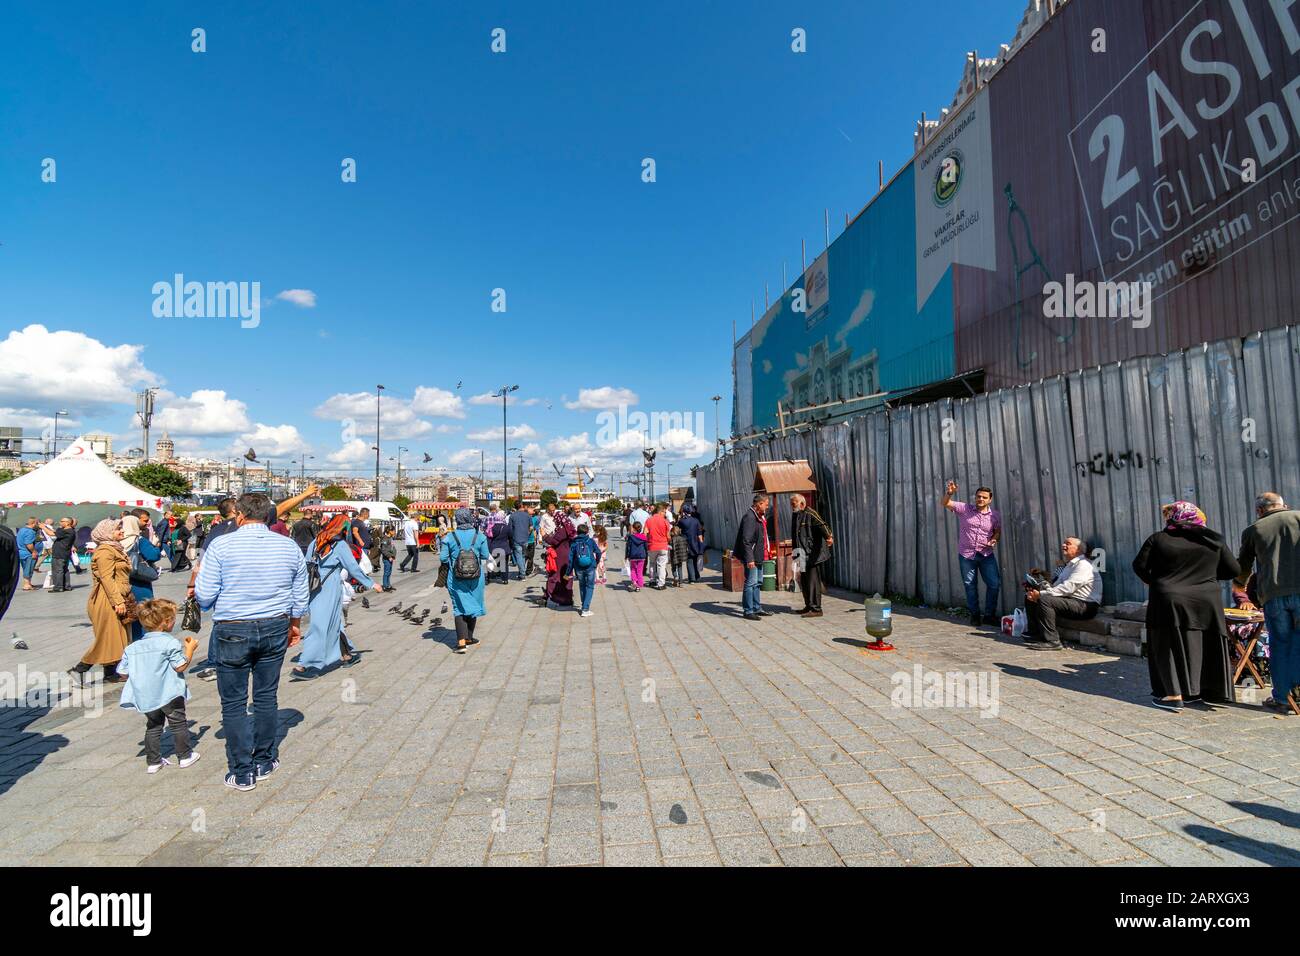 Local Turks congregate in a busy square on a sunny summer day near the Galata Bridge in Istanbul, Turkey. Stock Photo